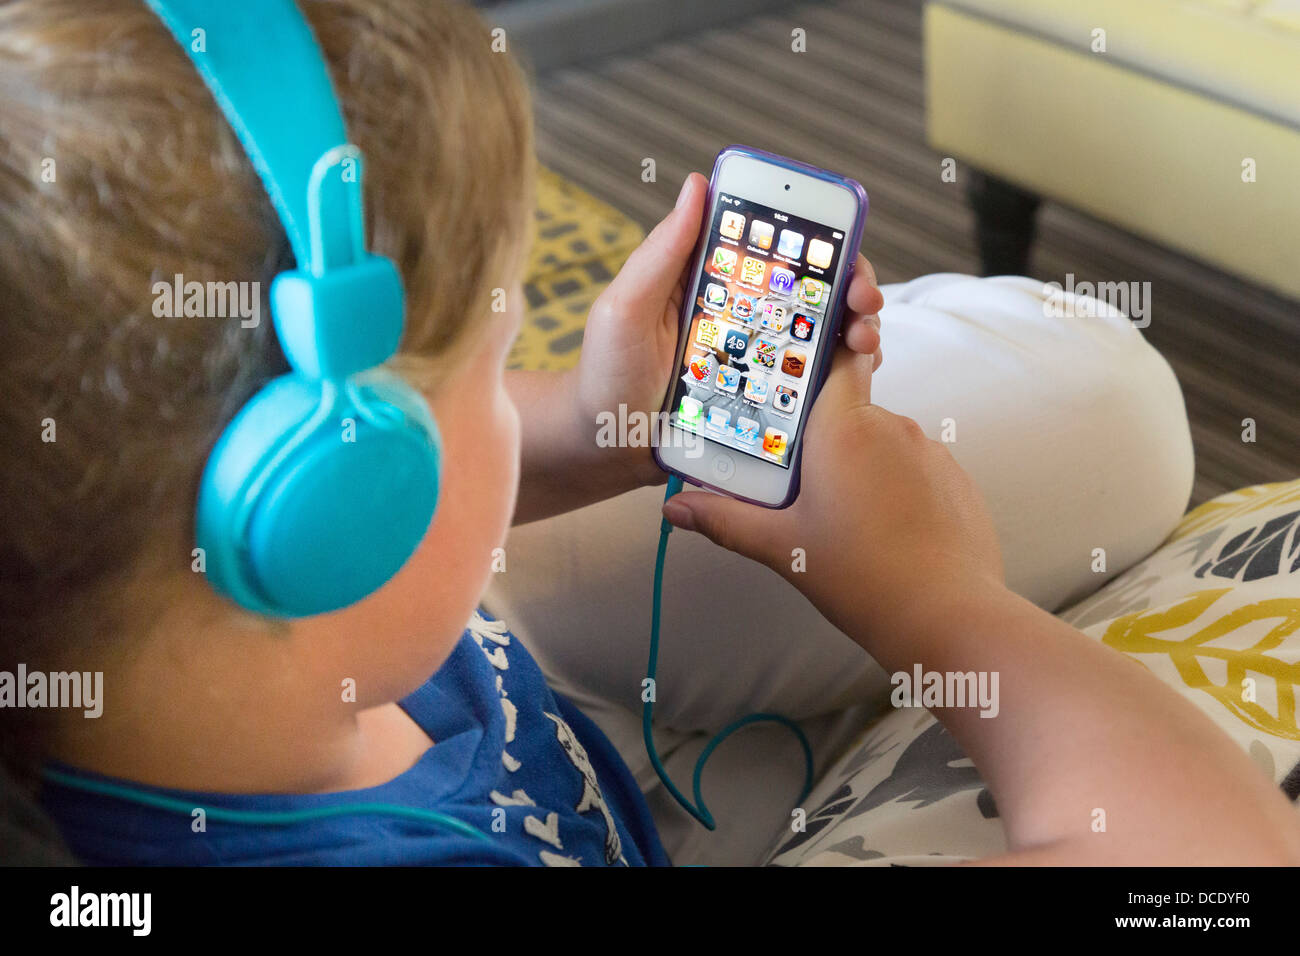 young girl listening to music on iphone smartphone Stock Photo